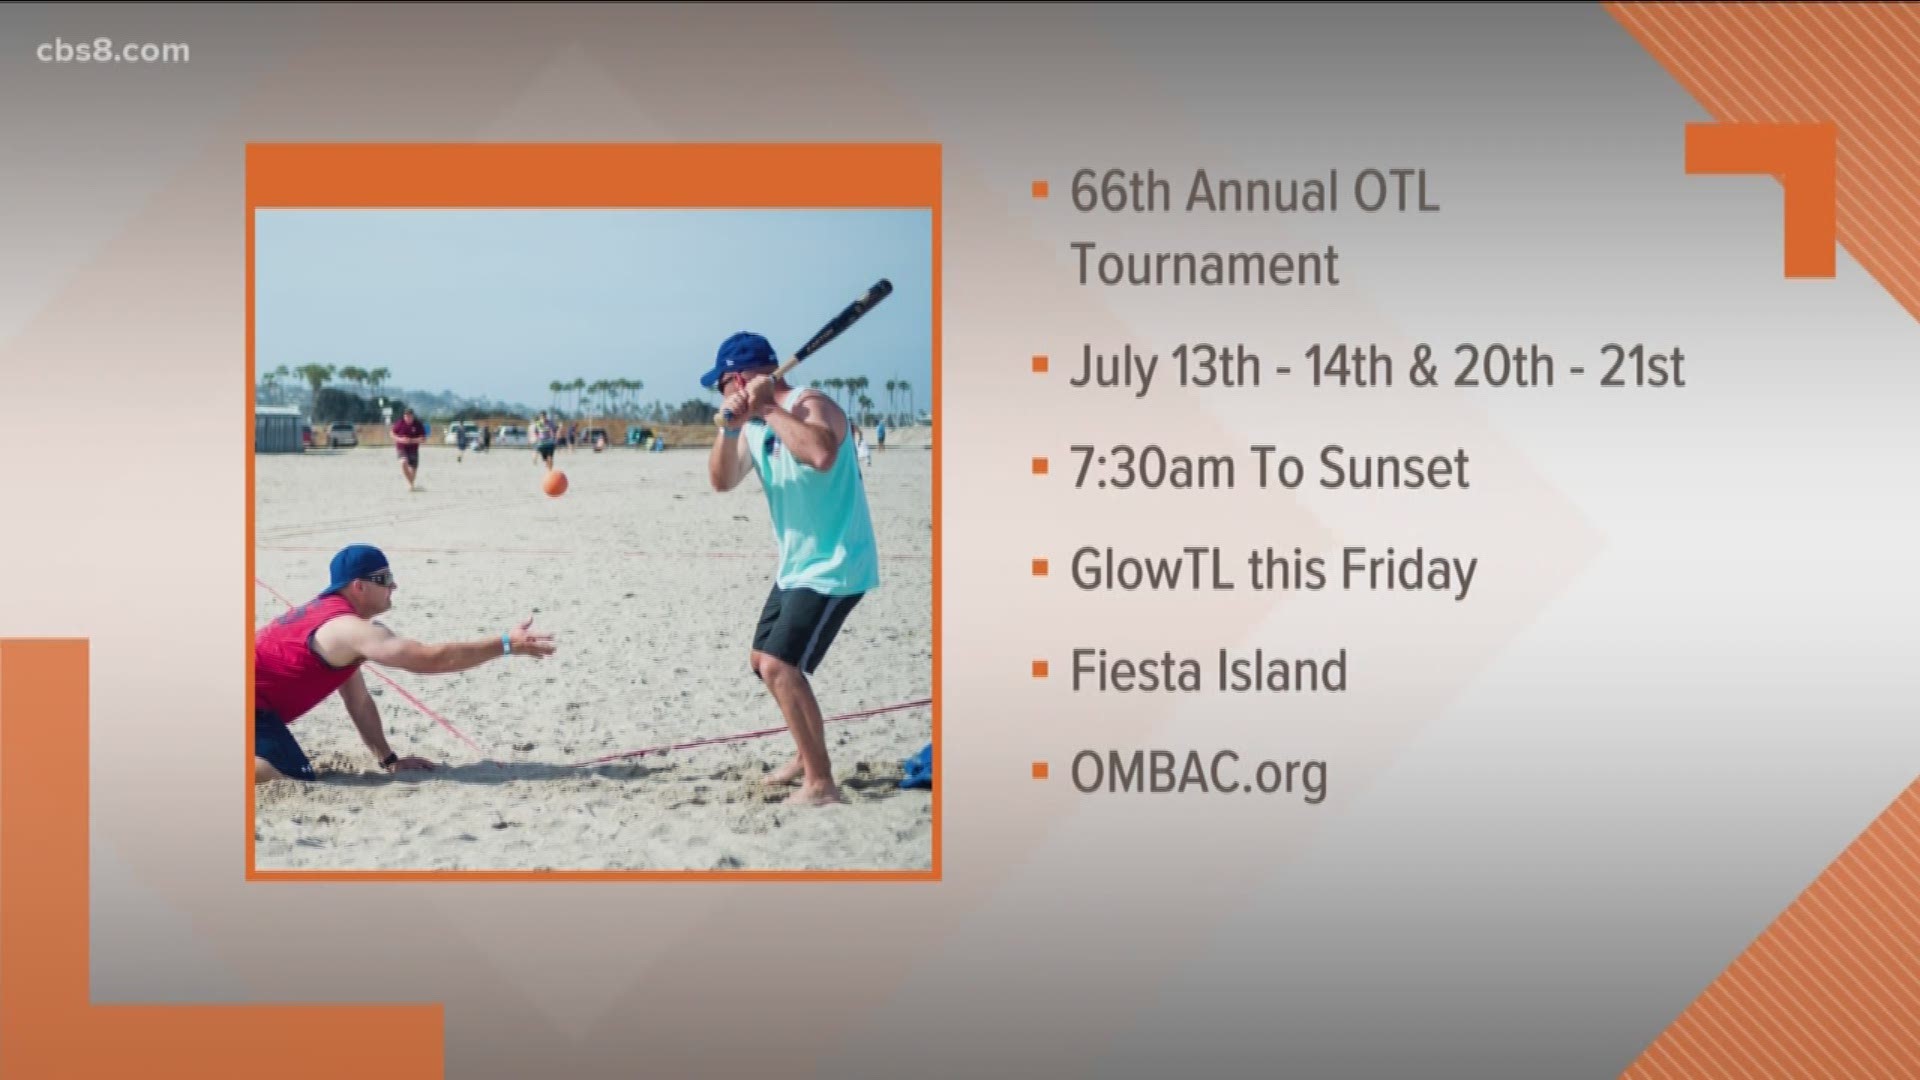 The 66th Annual World Championship Over-the-Line (OTL) Tournament will take place on July 13-14 and July 20-21 at Fiesta Island on Mission Bay.